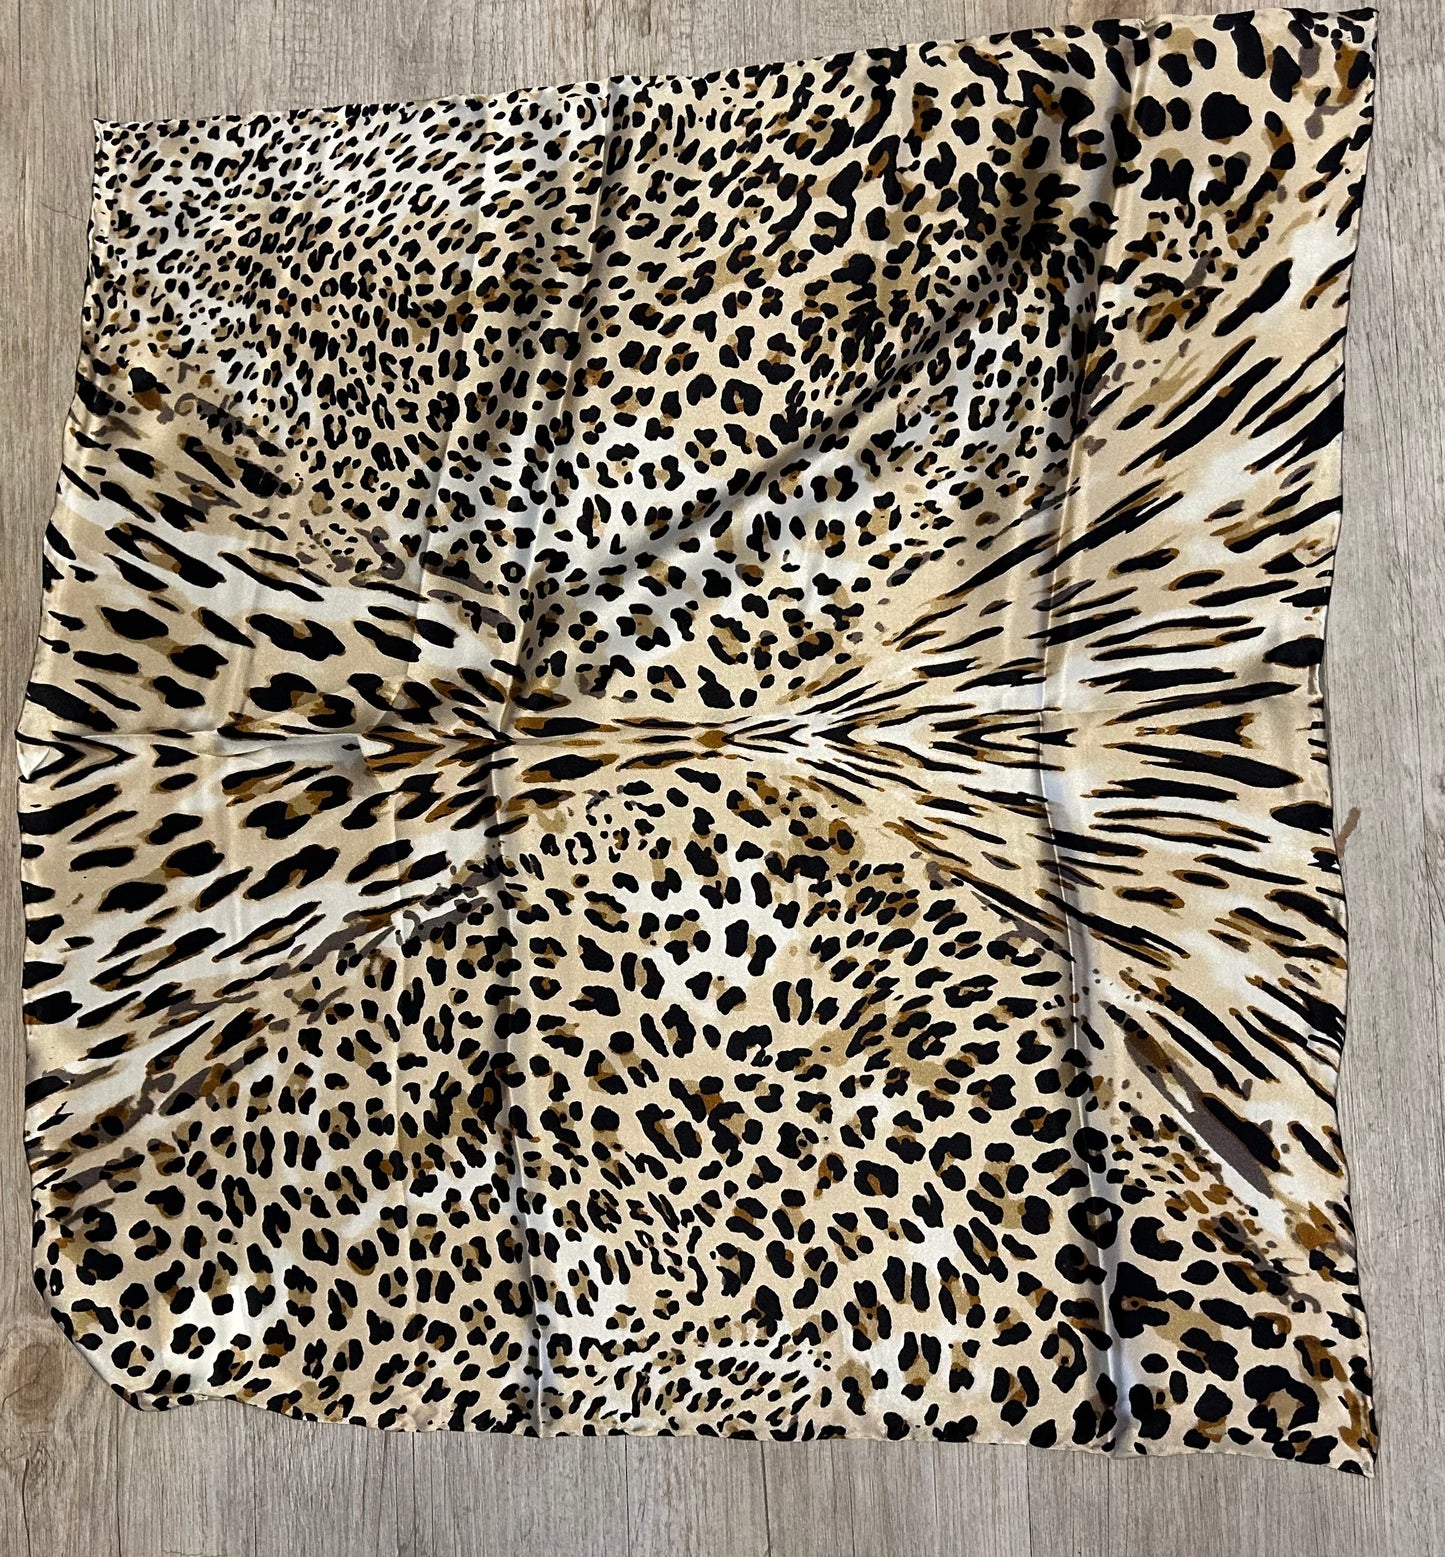 Leopard Show Scarf